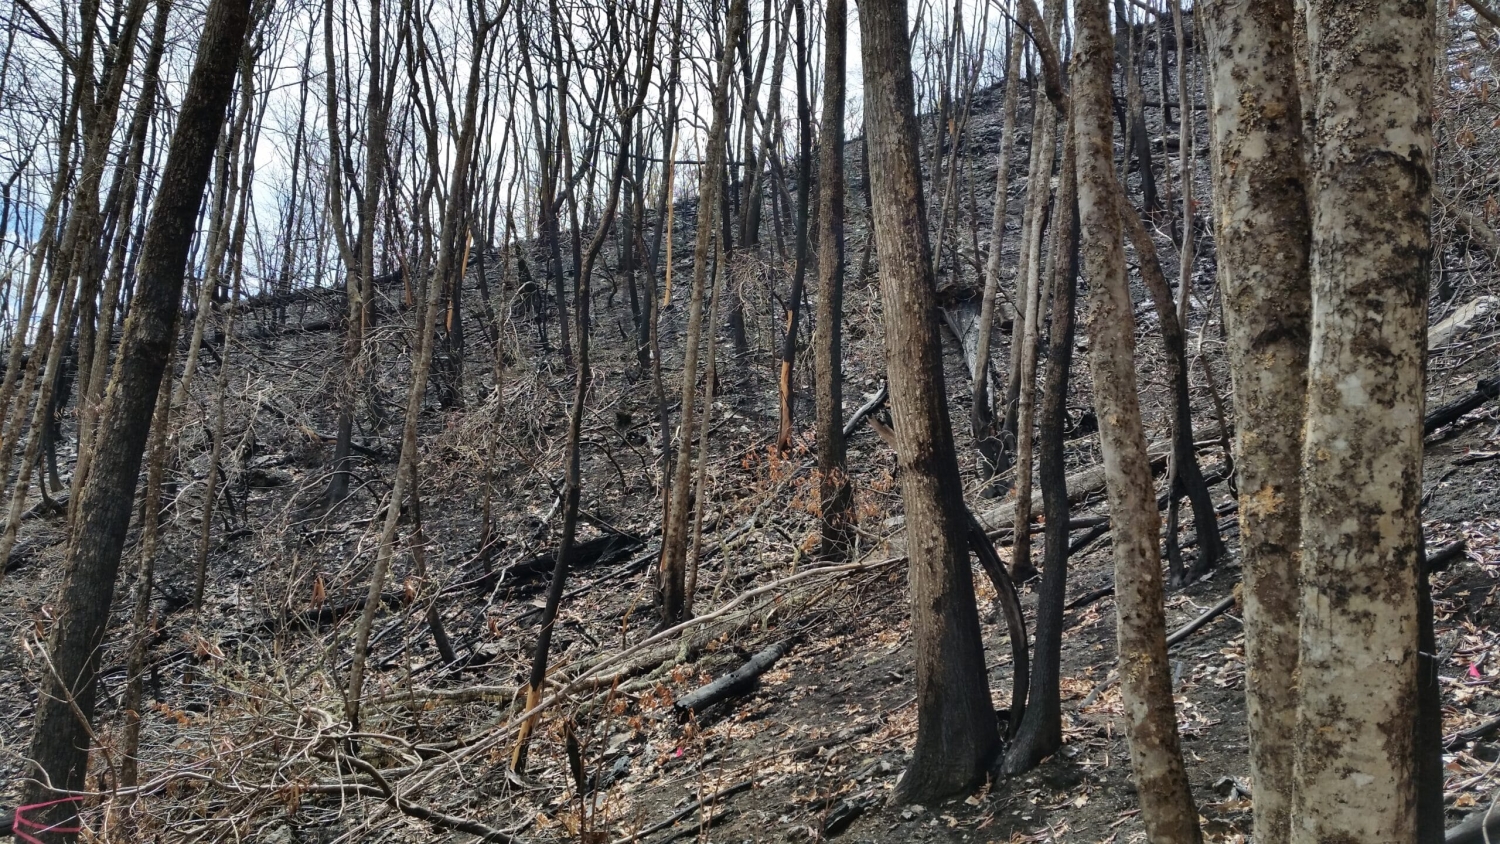 A stand of burned trees